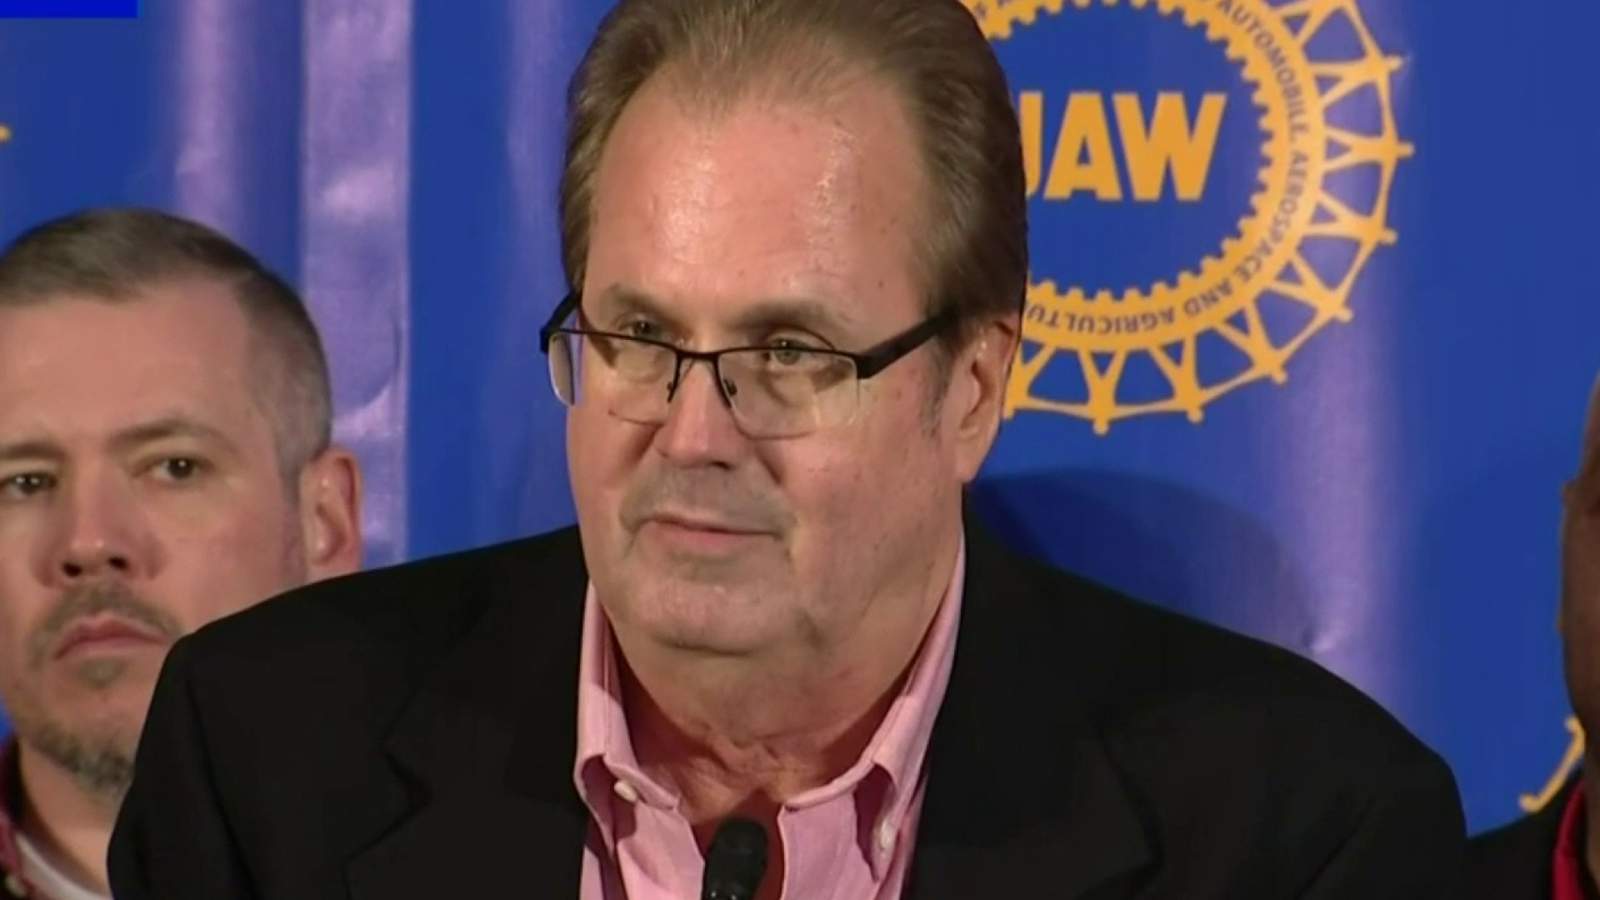 UAW President Gary Jones announces leave of absence, Rory Gamble to serve as interim president